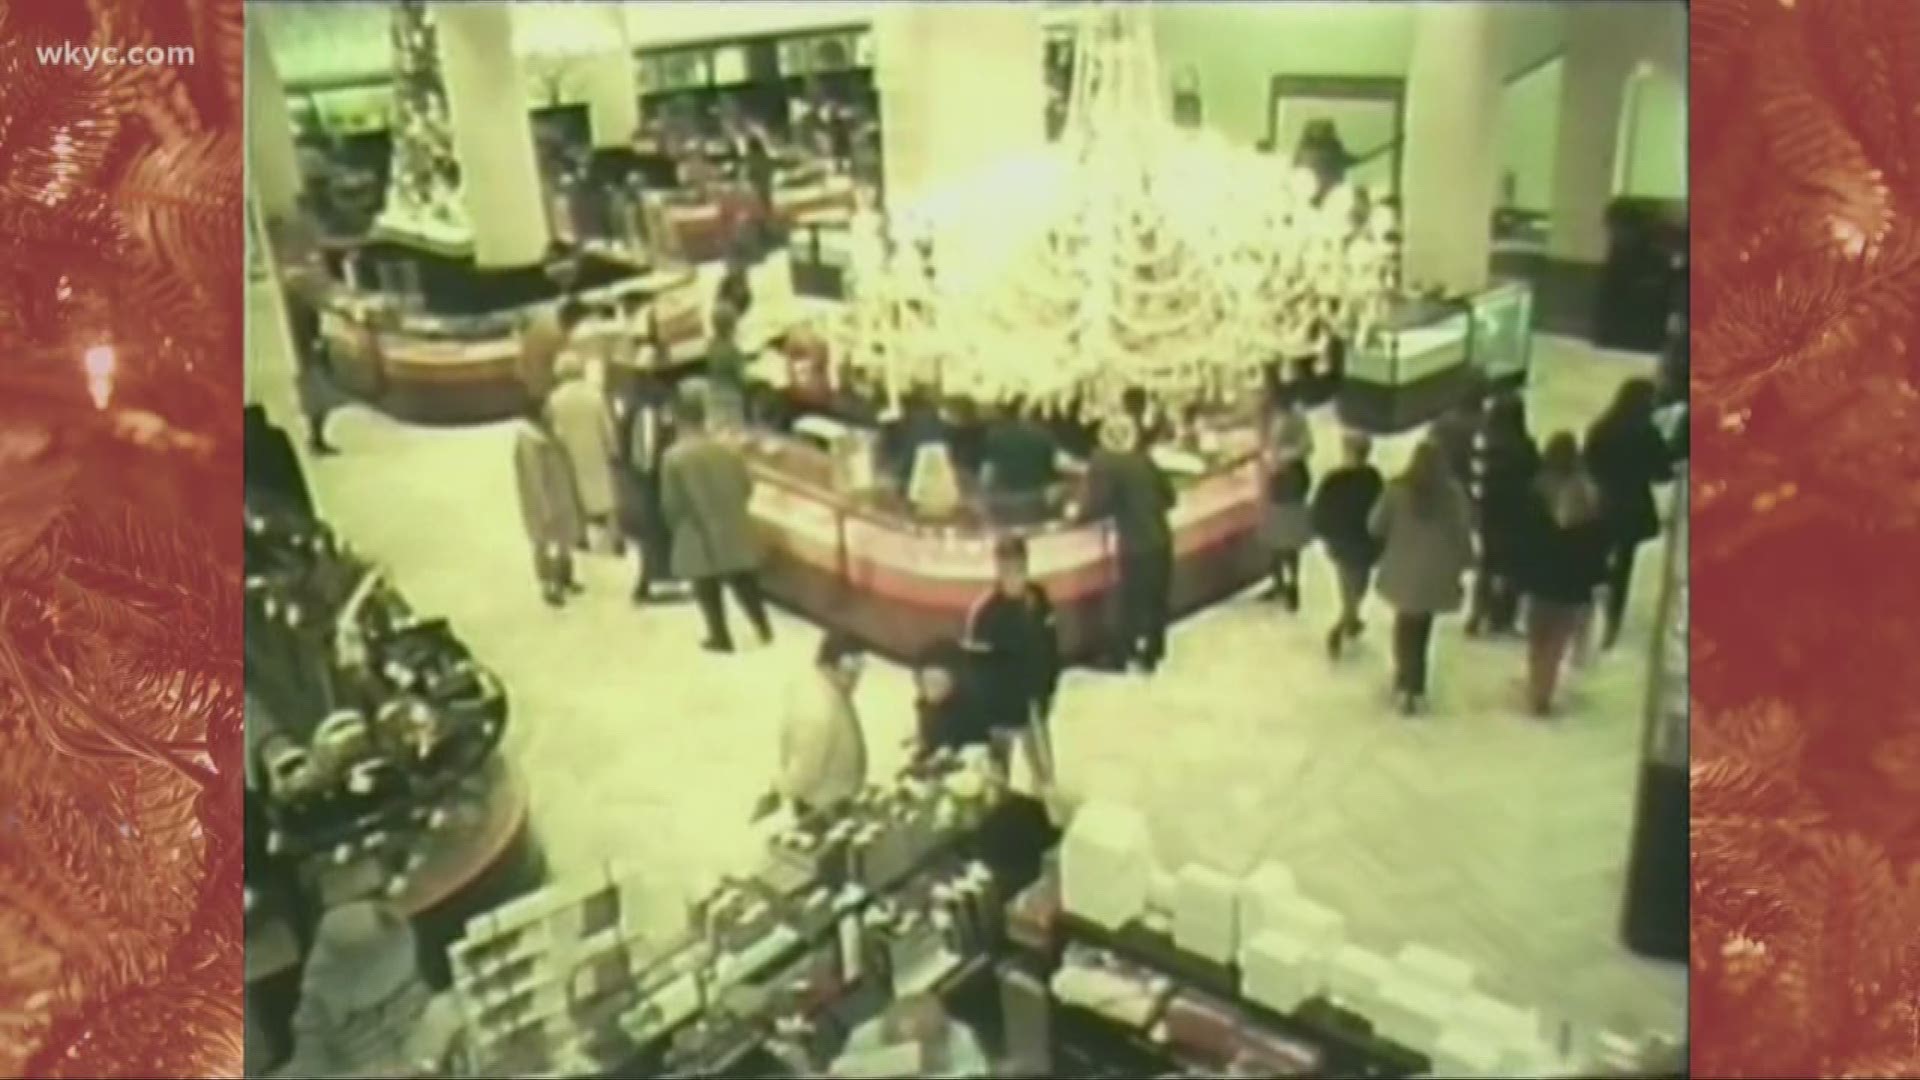 Stores like Higbee's and Halle's may be long gone, but the memories remain. Leon takes a look back at some of the moments that made his childhood so special.